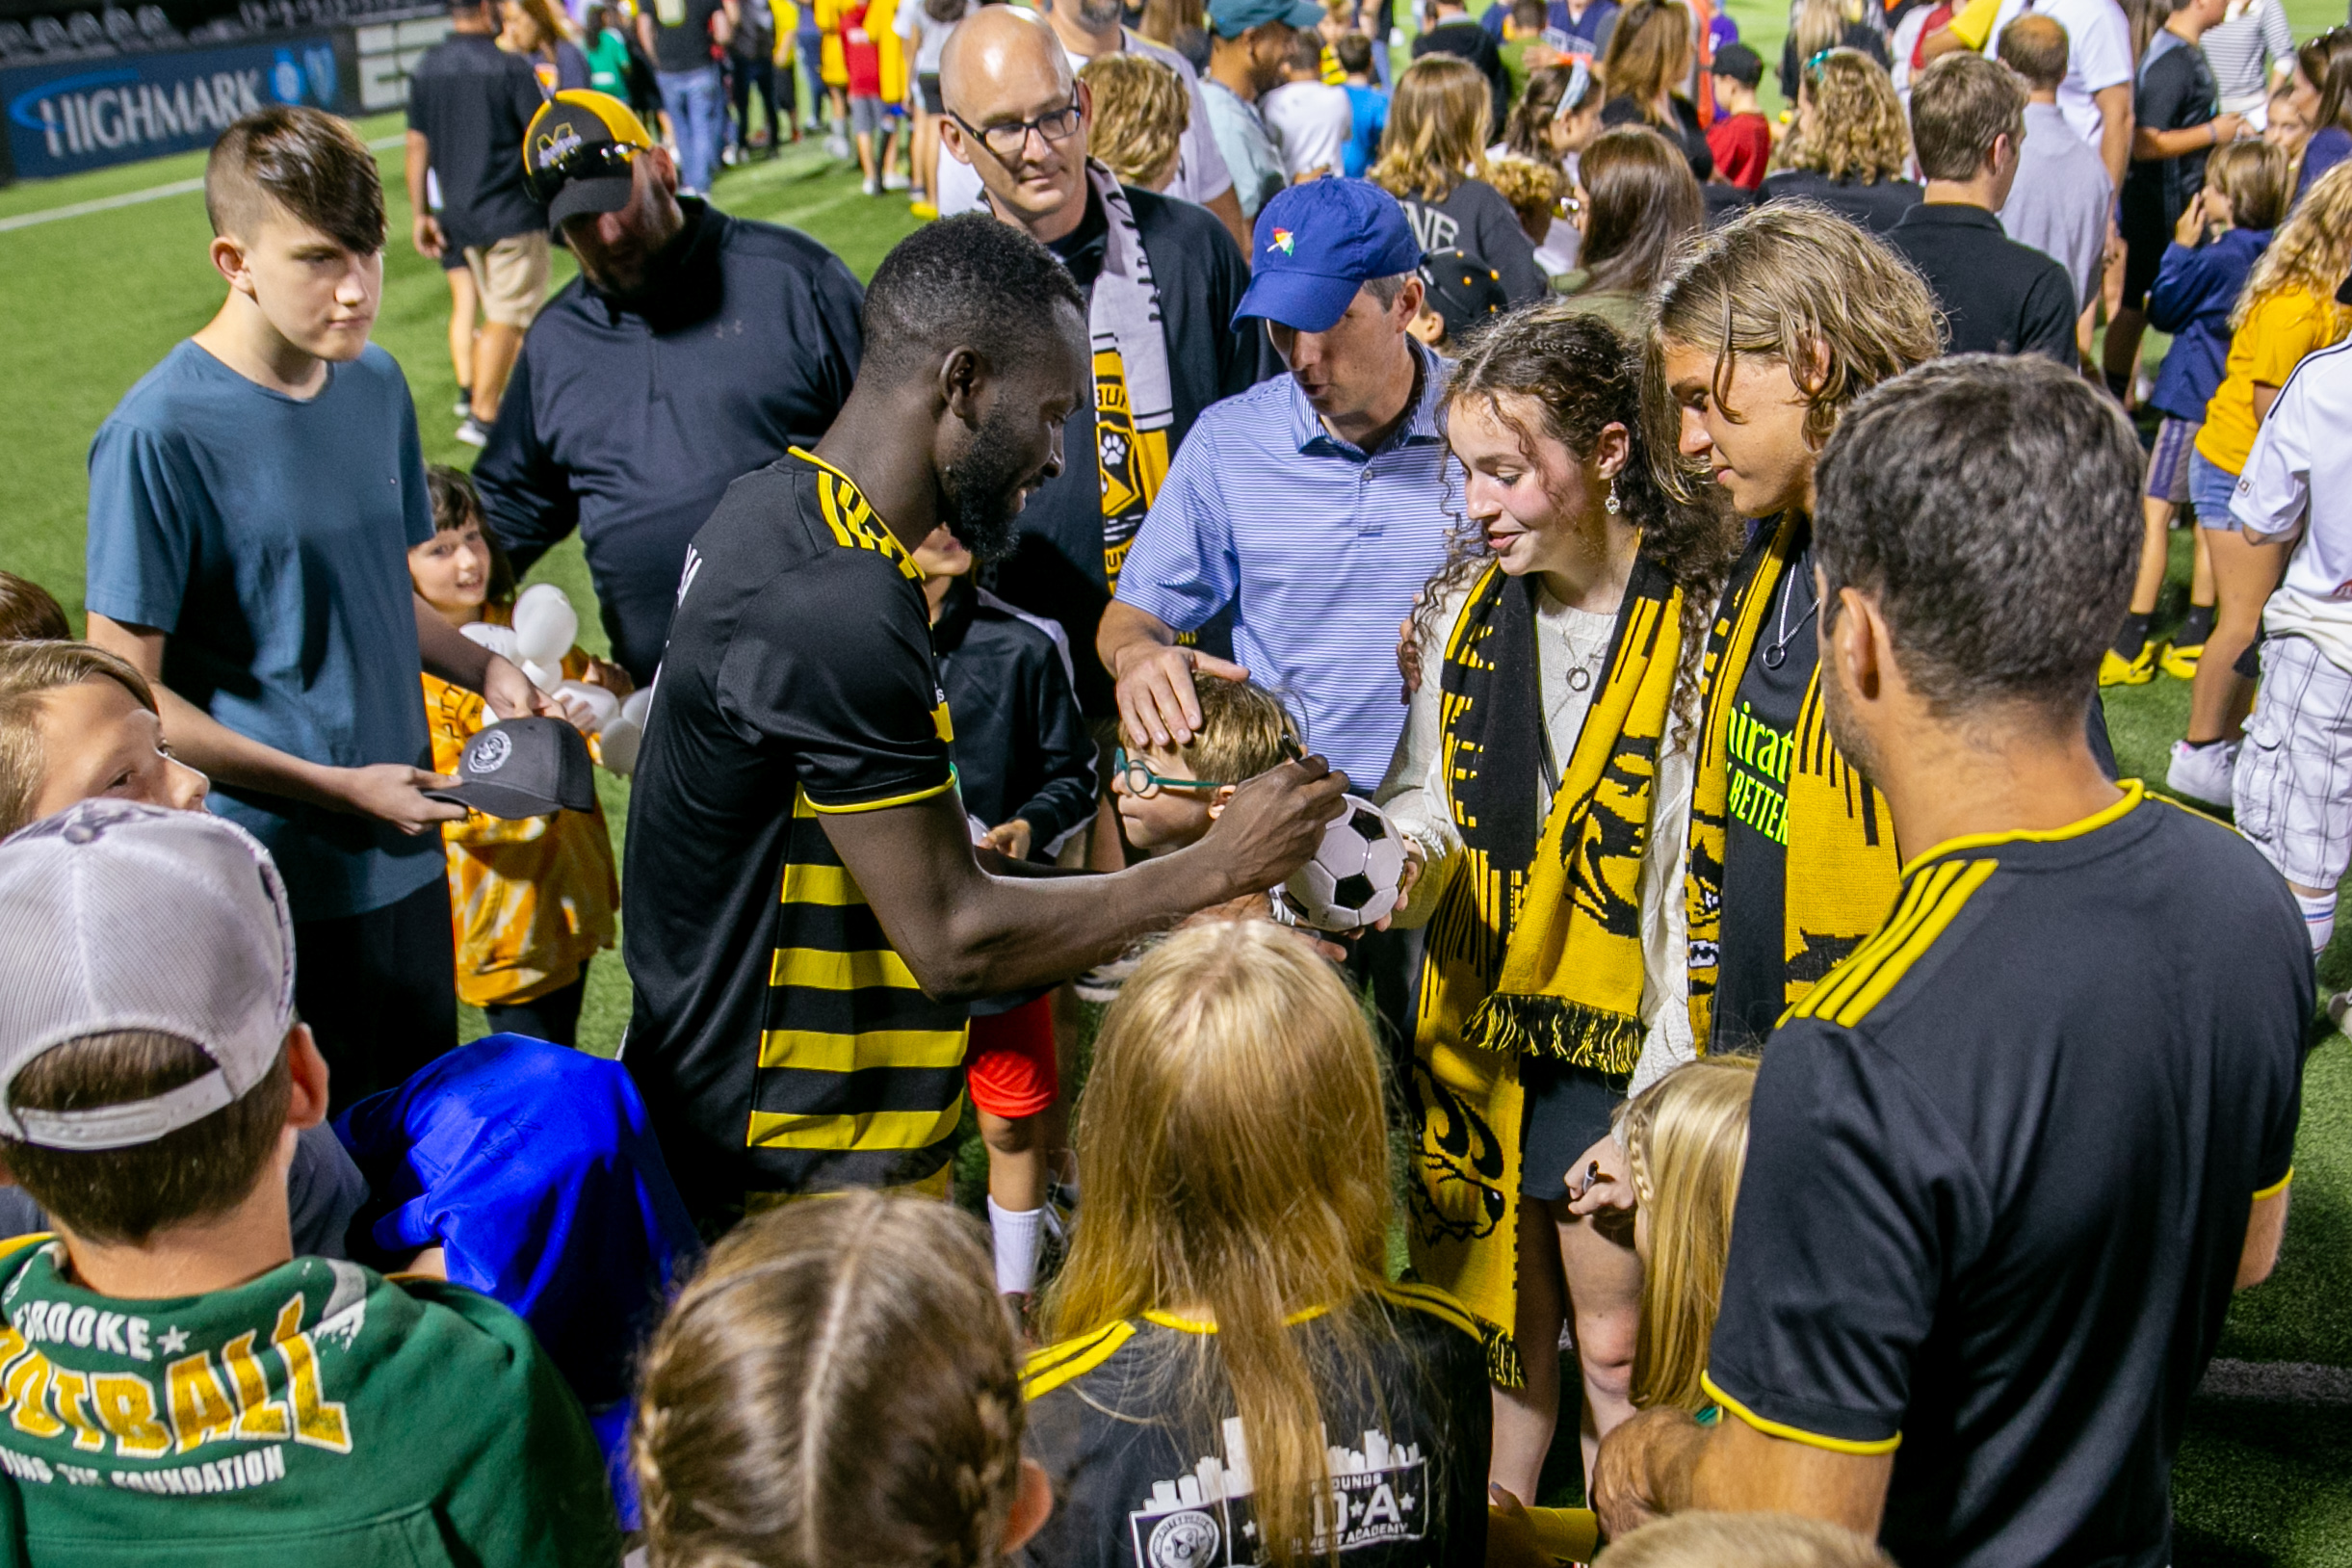 Albert Dikwa signs autographs on the field after the Riverhounds' 3-1 win over Loudoun United FC on Sept. 9, 2023 at Highmark Stadium.